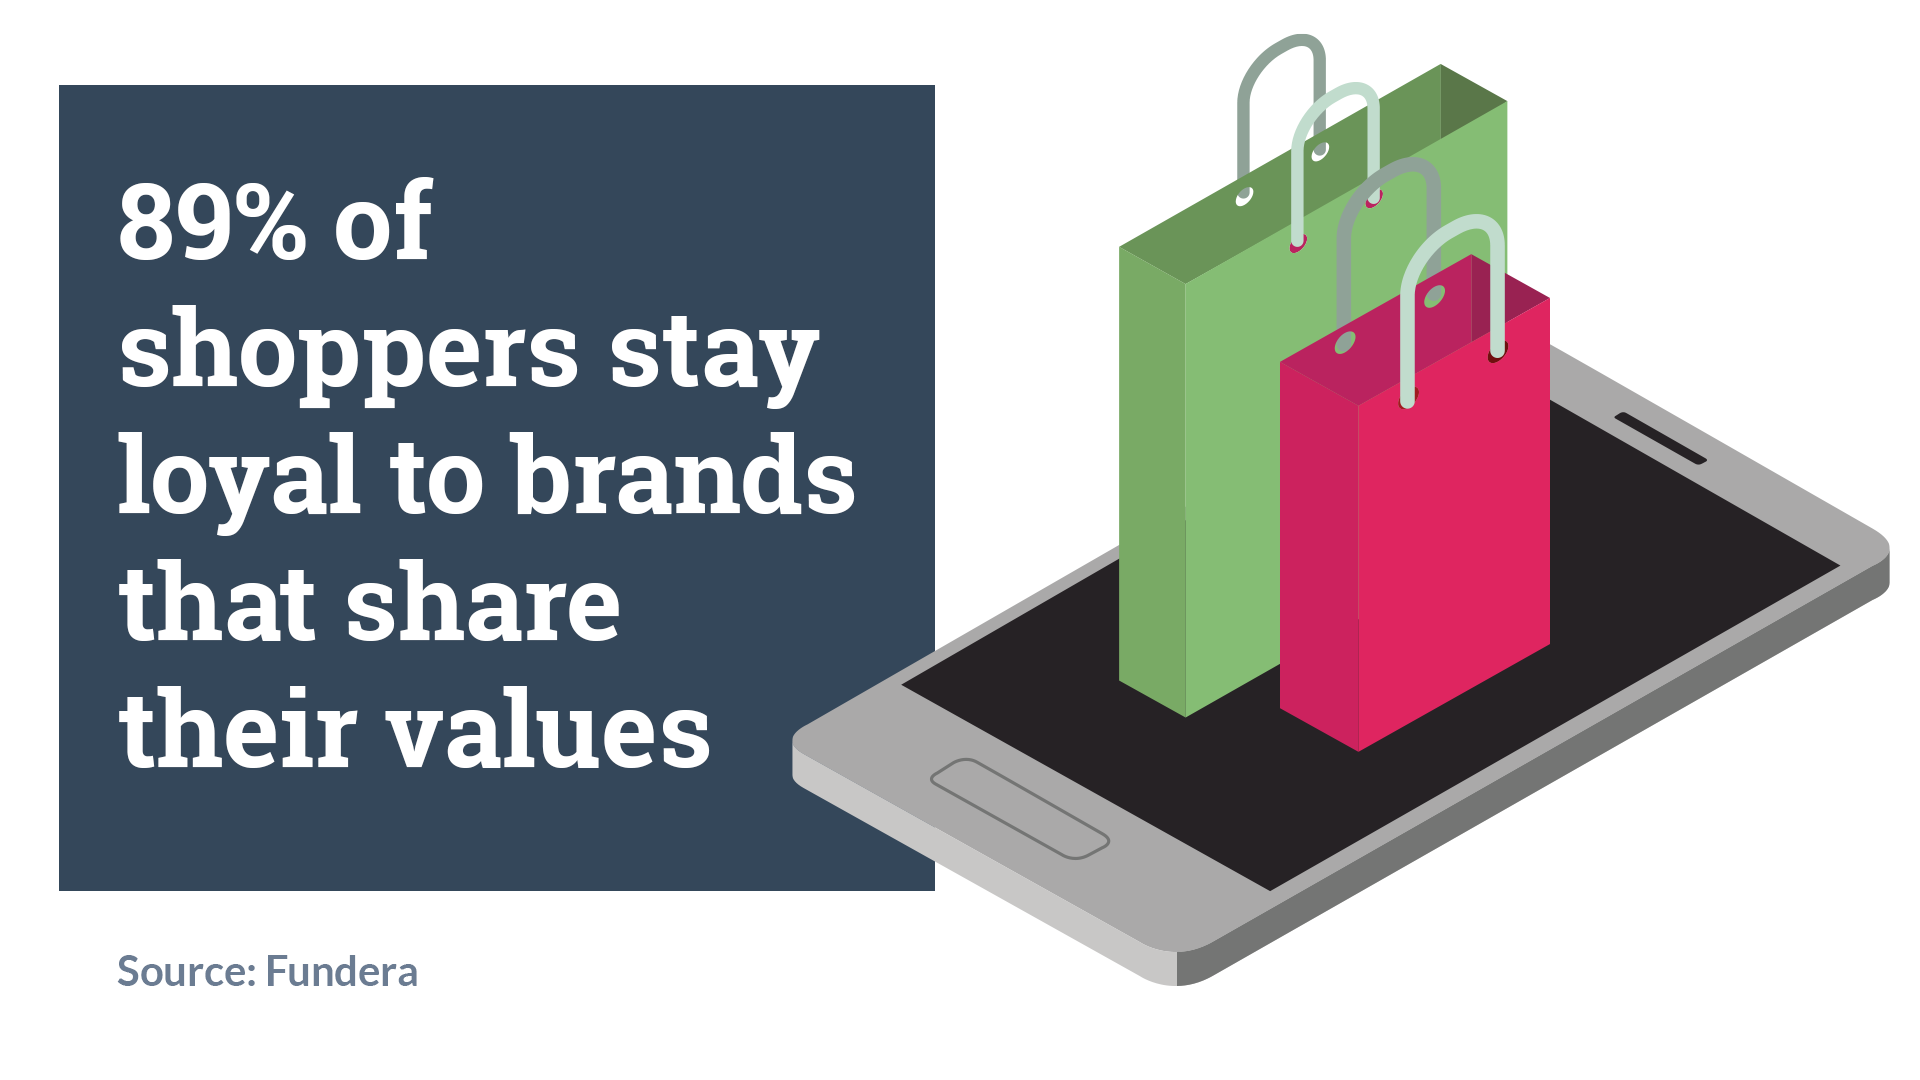 89% of shoppers stay loyal to brands that share their values